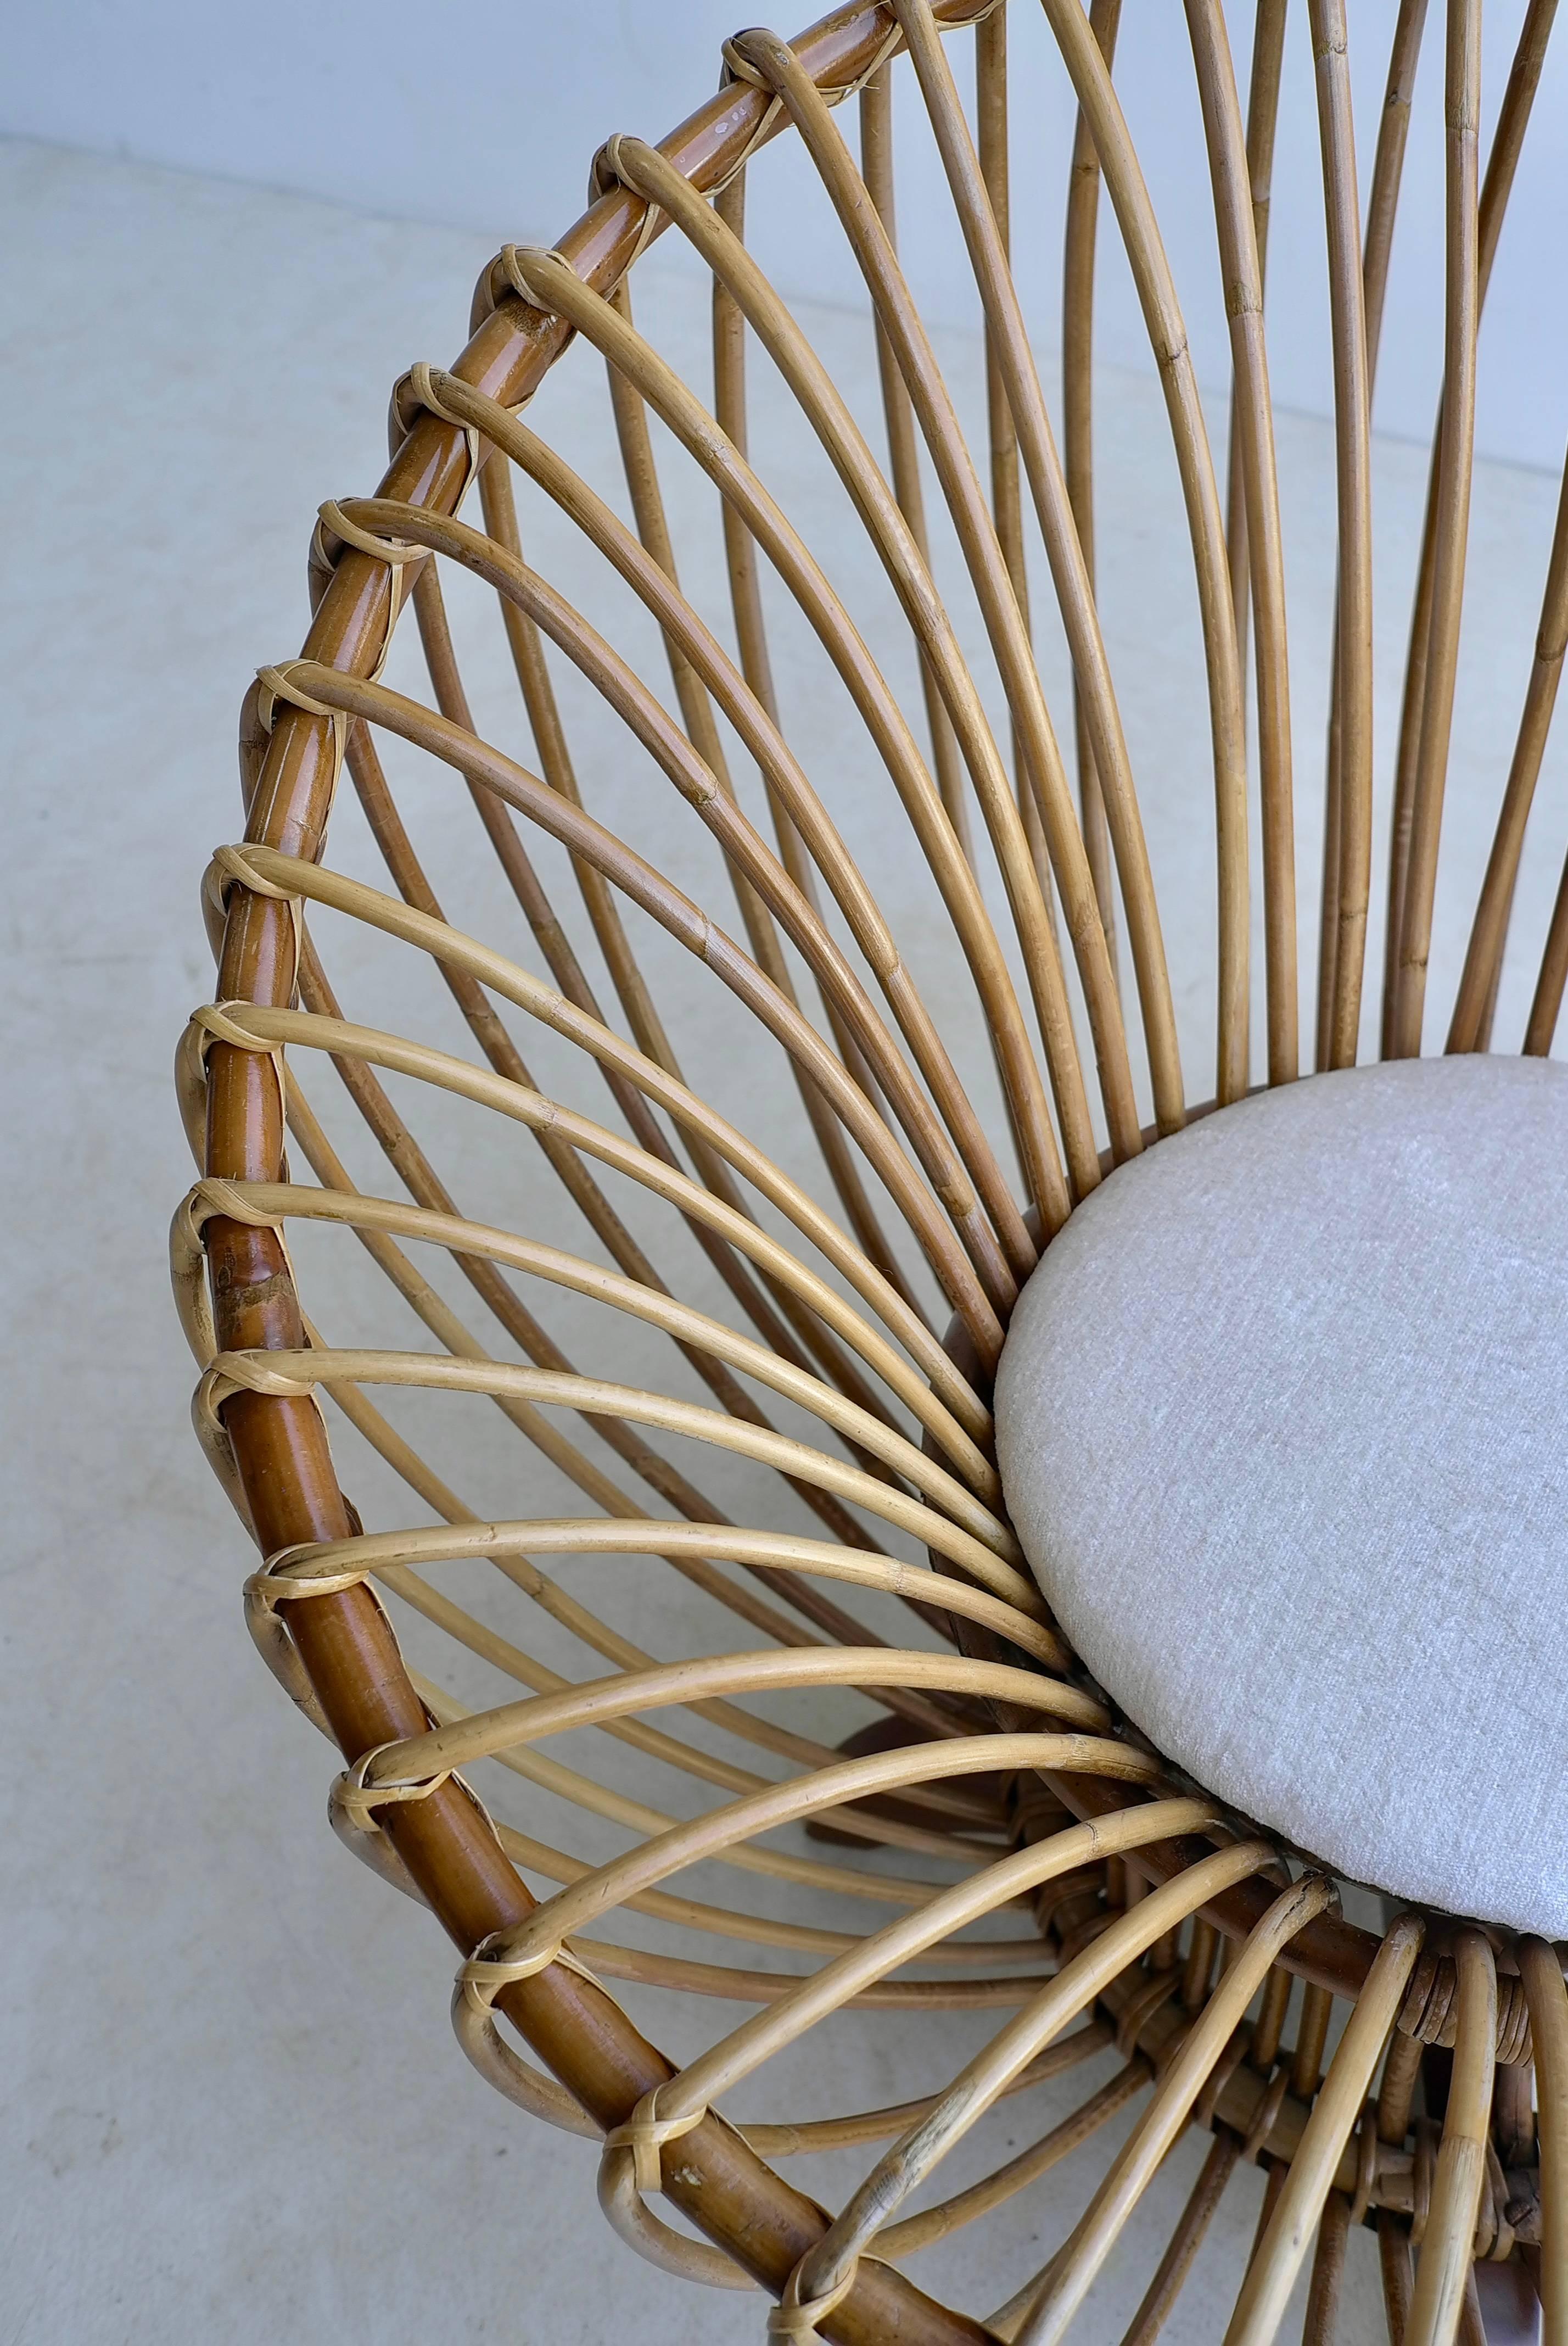 Lovely bamboo lounge chair in style of Franco Albini elegant round shape that suits any interior.

Measures: H 69 x B 80 x D 76 cm. Seat height 32 cm.